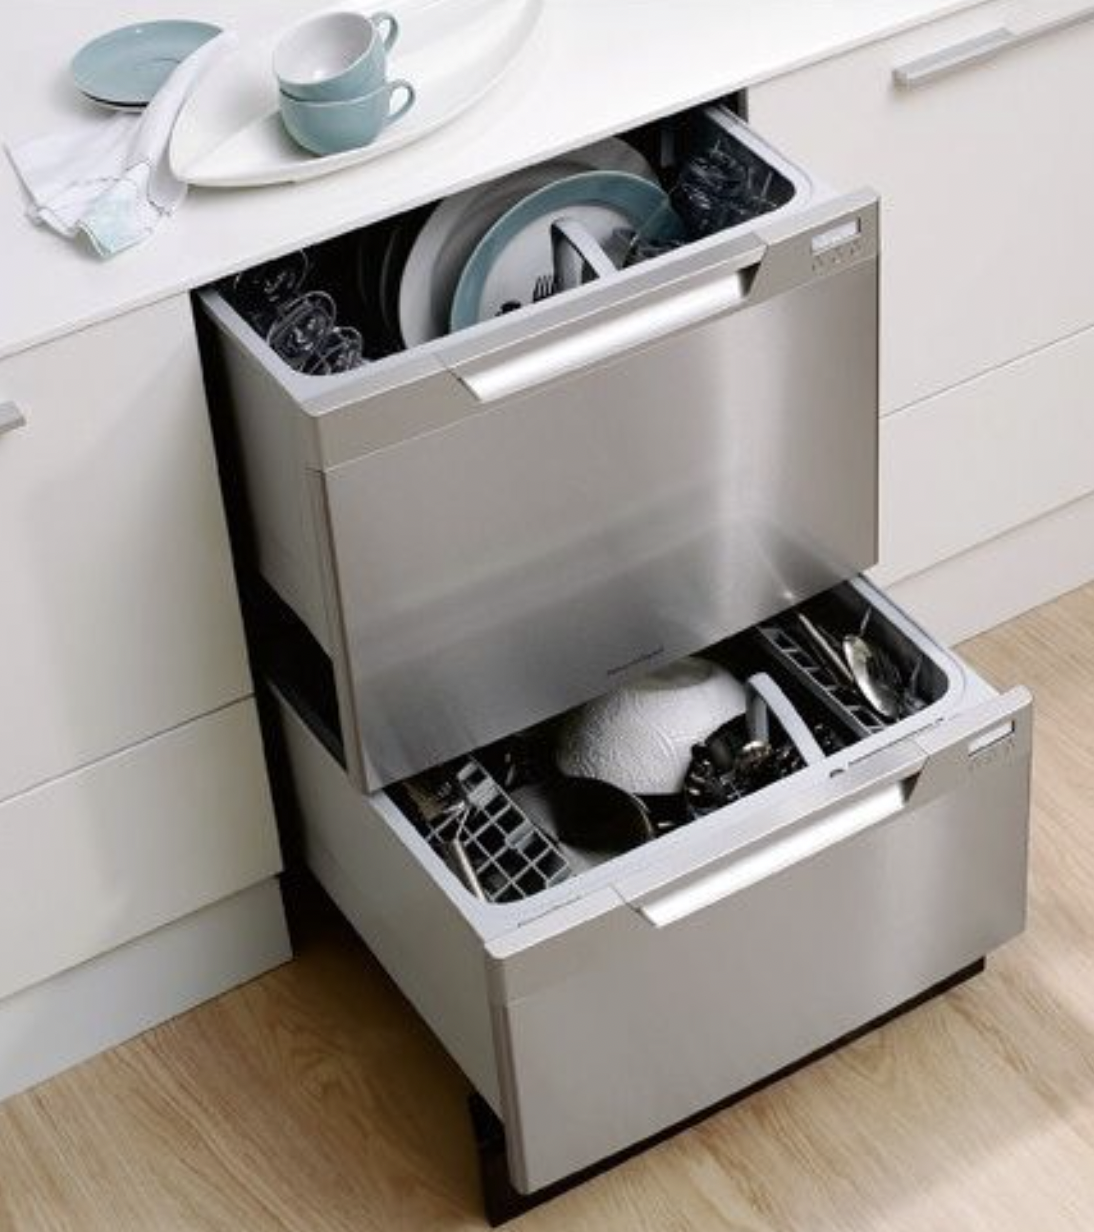 Pros and Cons of buying a Fisher Paykel 2 Drawer Dishwasher